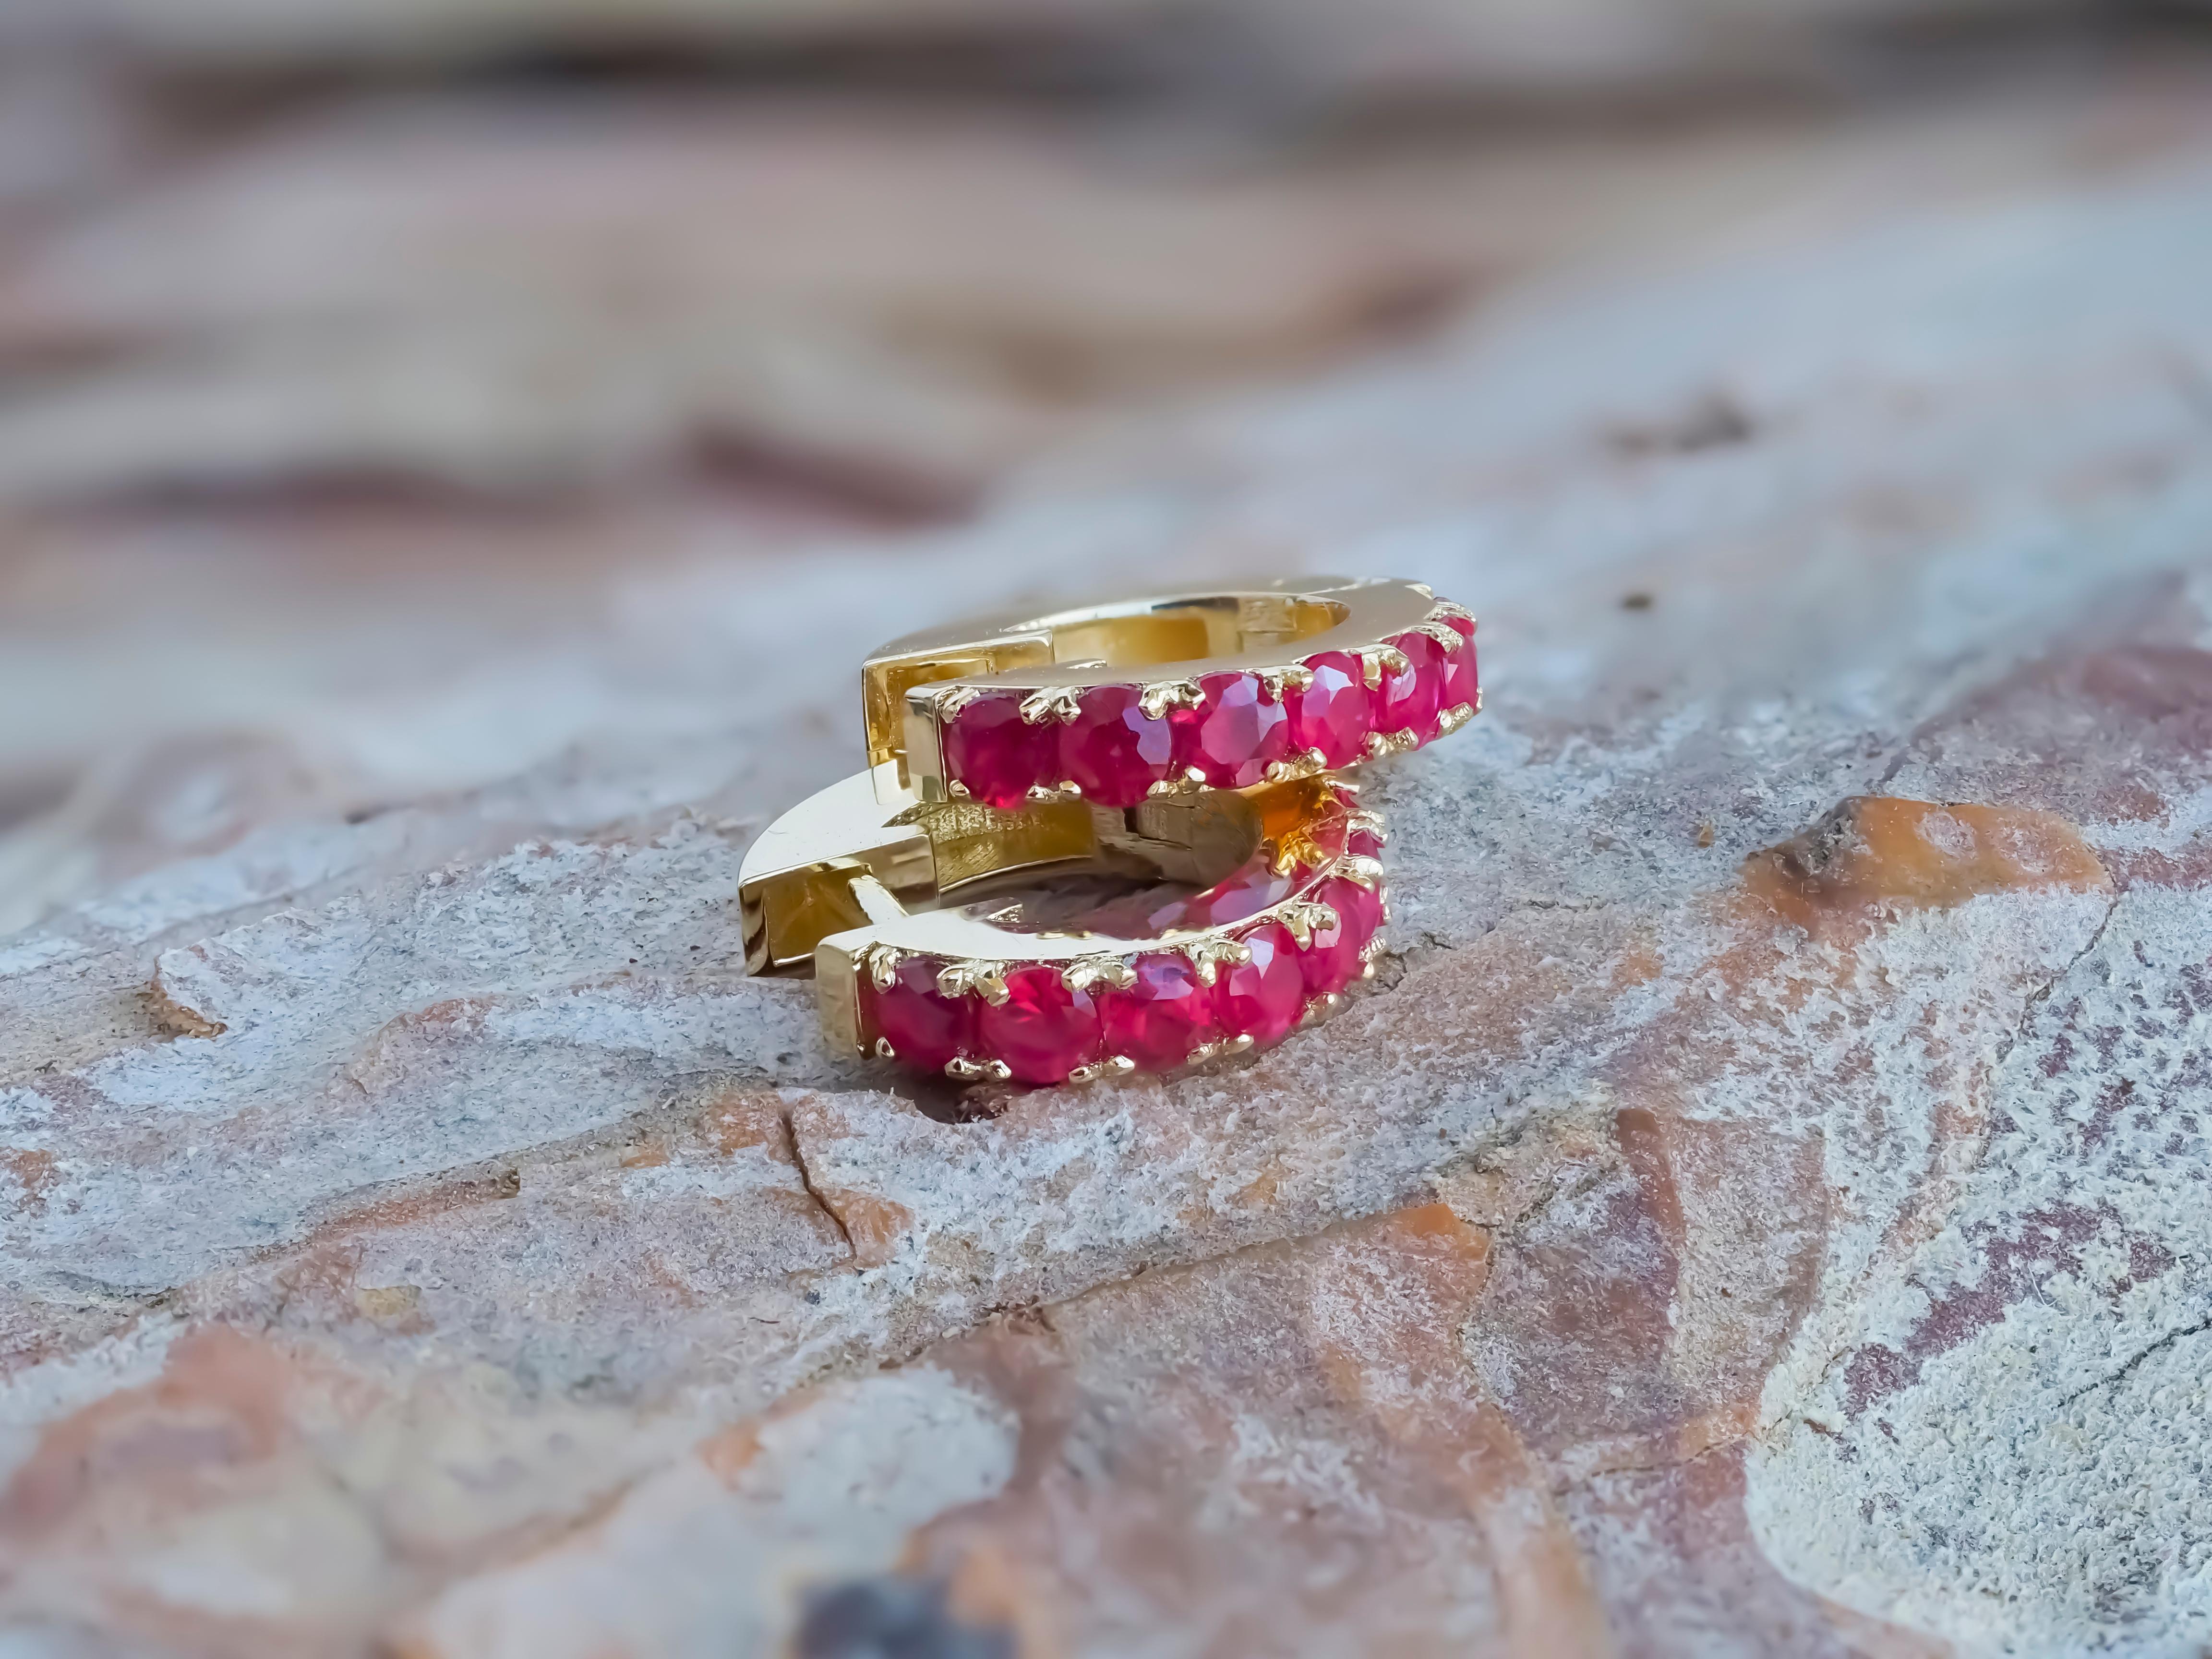 14 k gold hoop earrings with rubies
Metal: 14kt solid gold
Earring size: 12 mm.
Weight: 2.50 g.

Gemstones:
Rubies: 14 piece, round cut,red  color, transparent, approx 0.56 ct. (0.04x14)

💍Processing time for custom item takes: 5-7 working days.
💍